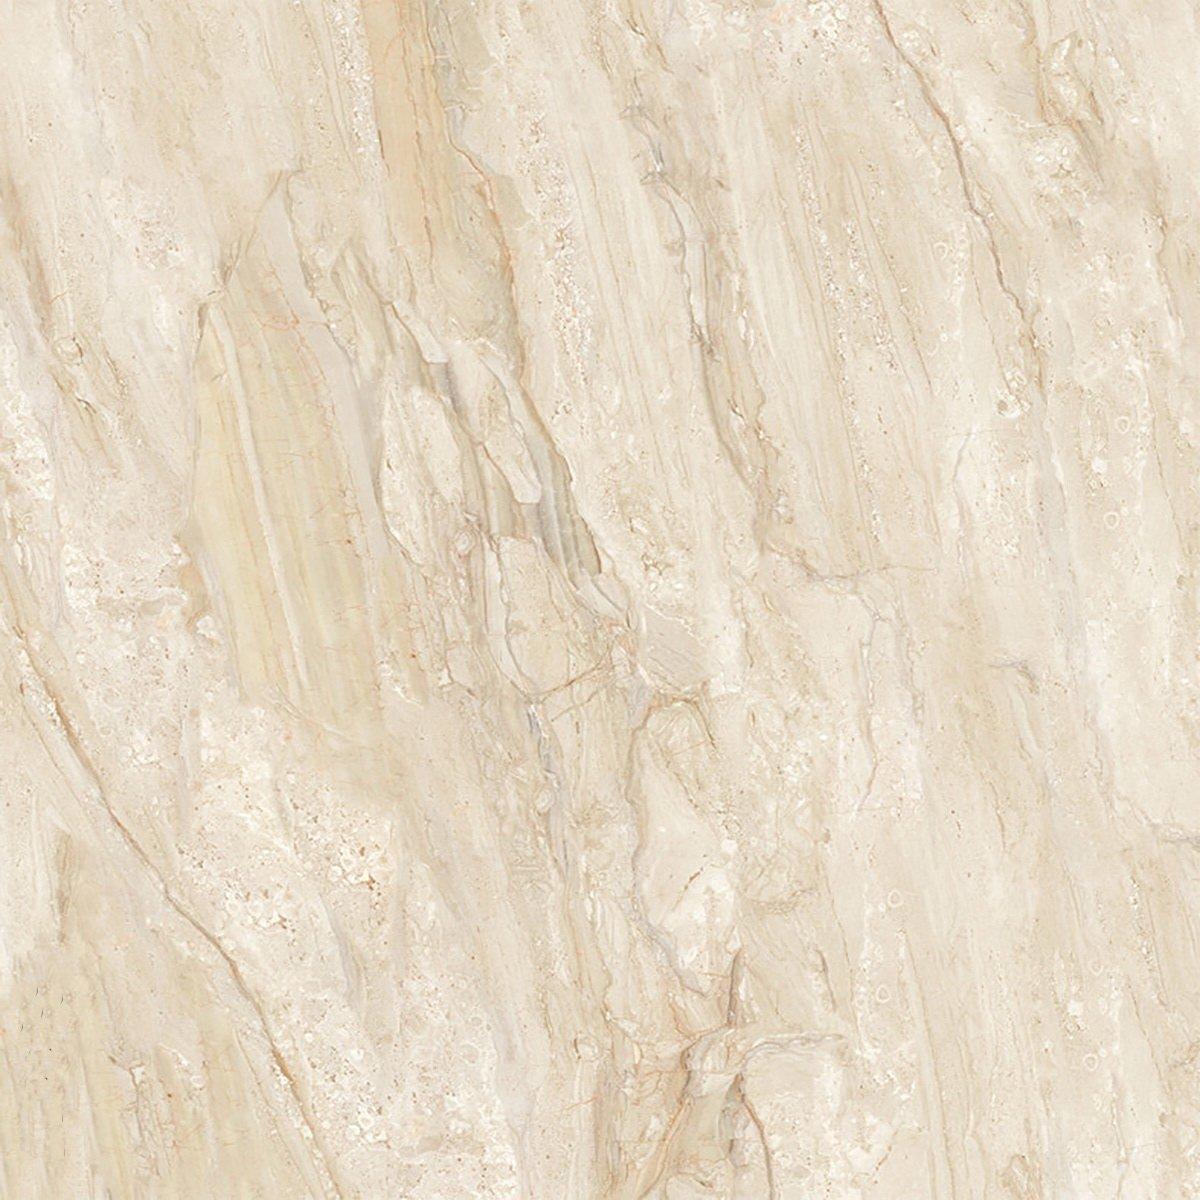 Hotel project tile Cream marfil Full polished marble tiles 100x100cm/40x40'